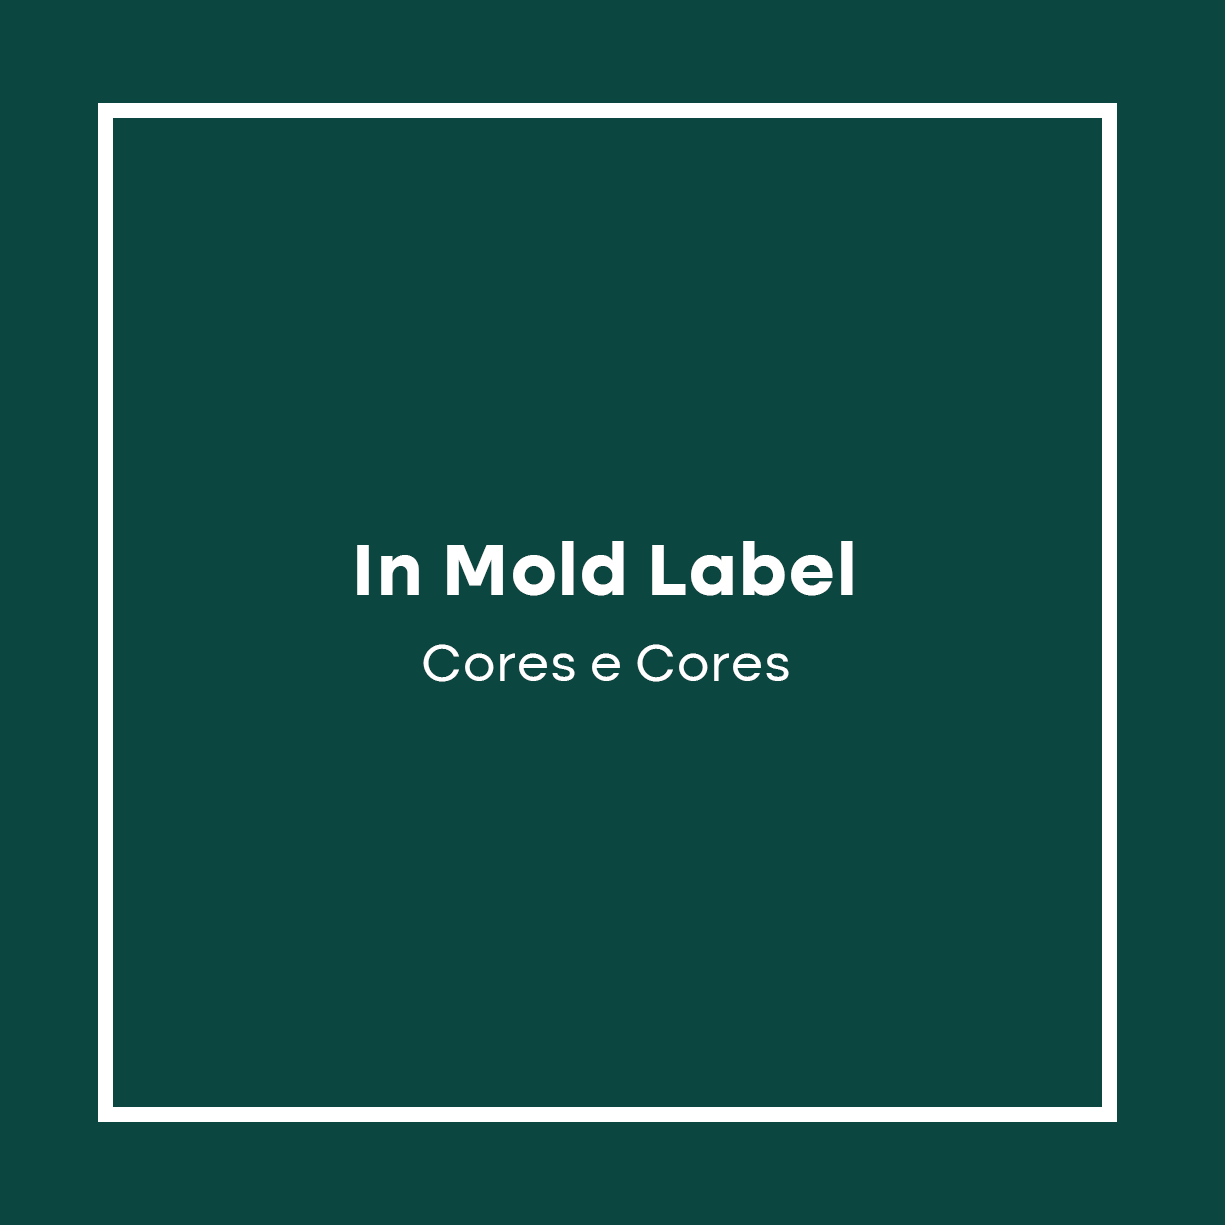 In Mold Label